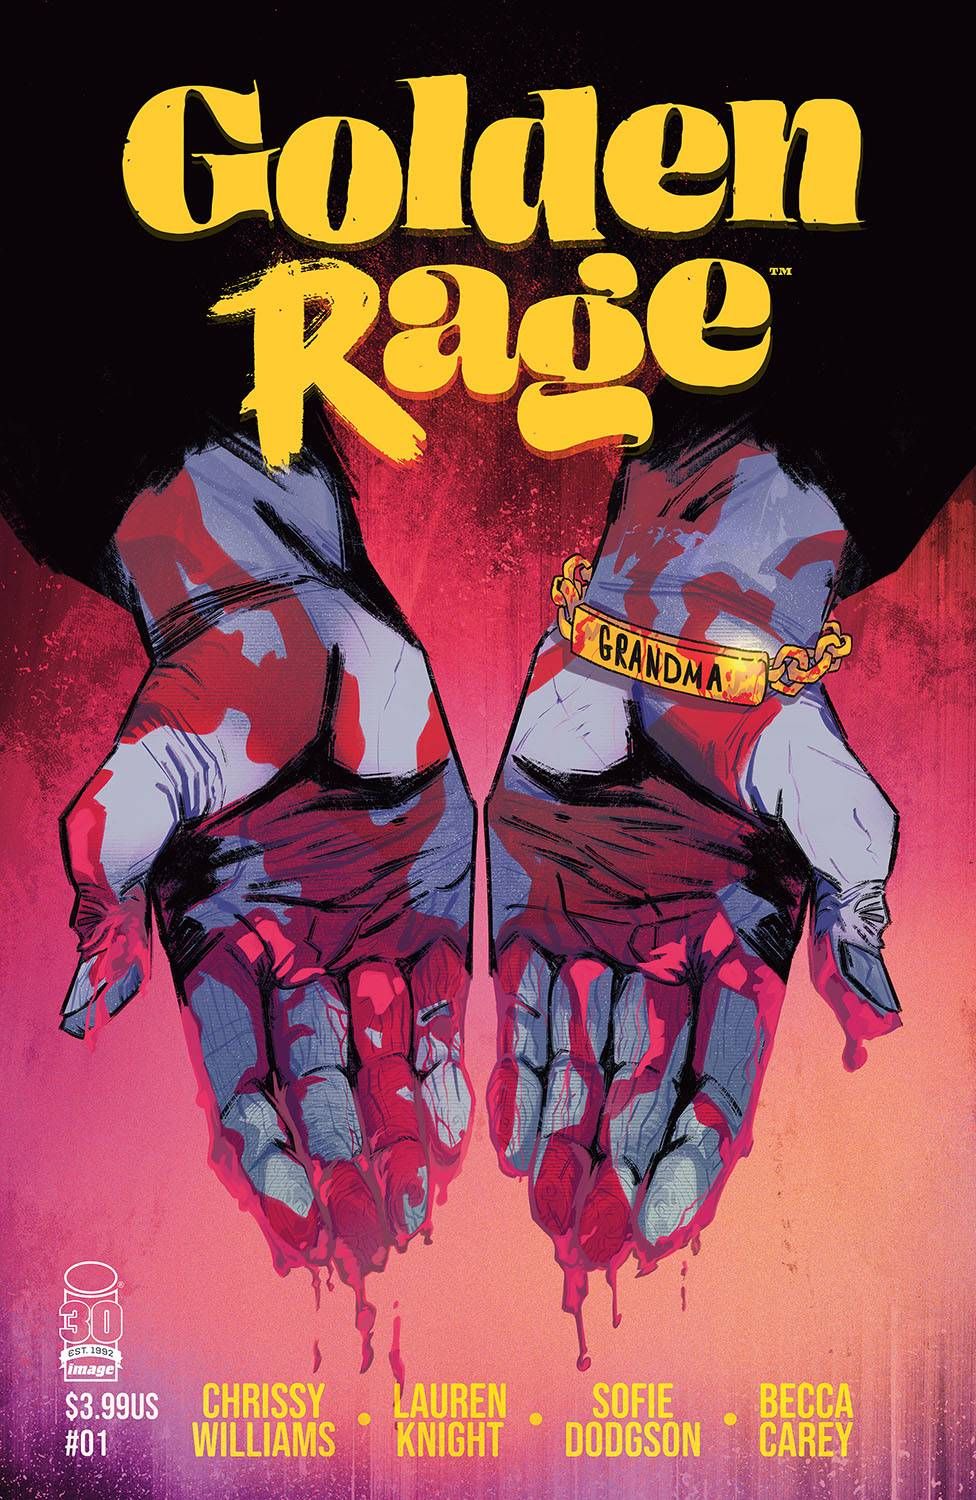 Golden Rage #1 cover